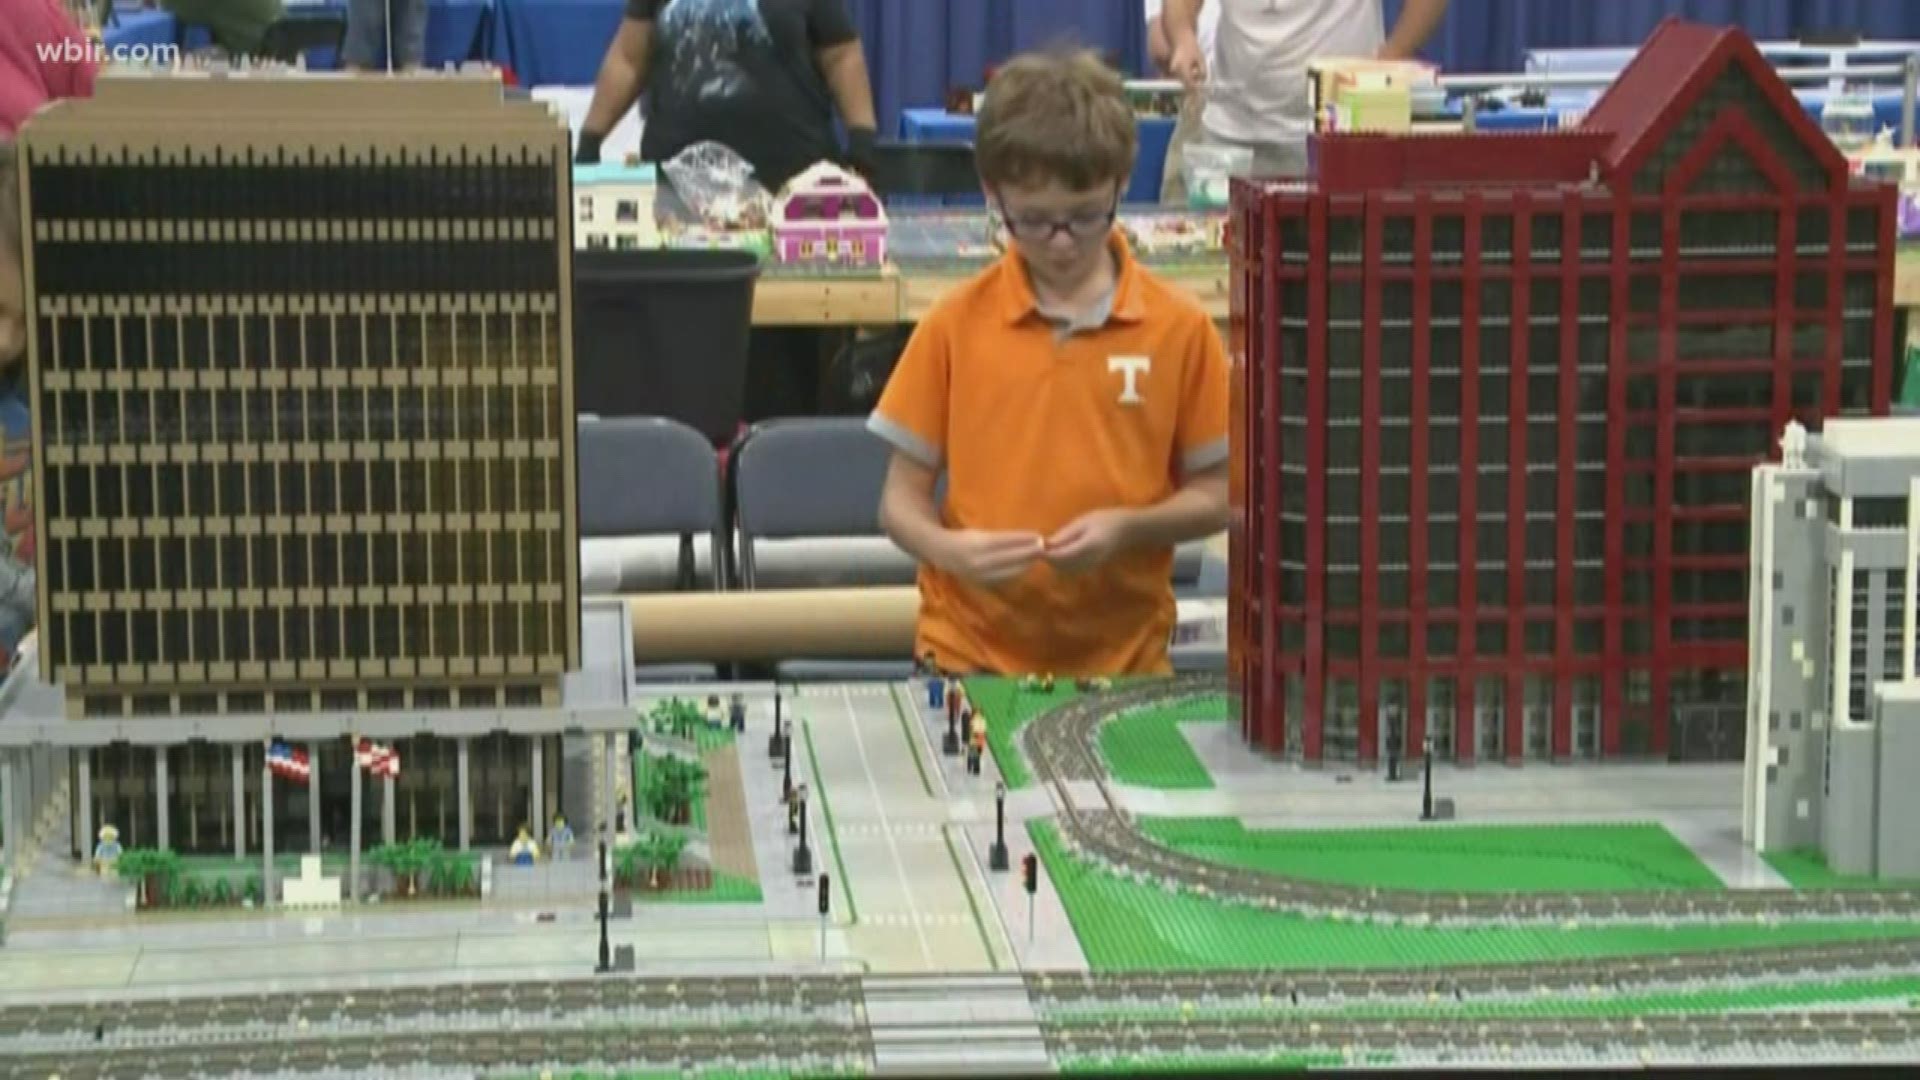 Lots of Legos fill the BrickUniverse Lego Convention. It runs Sept. 21 & 22 at the Knoxville Convention Center. Sept. 20, 2019-4pm.